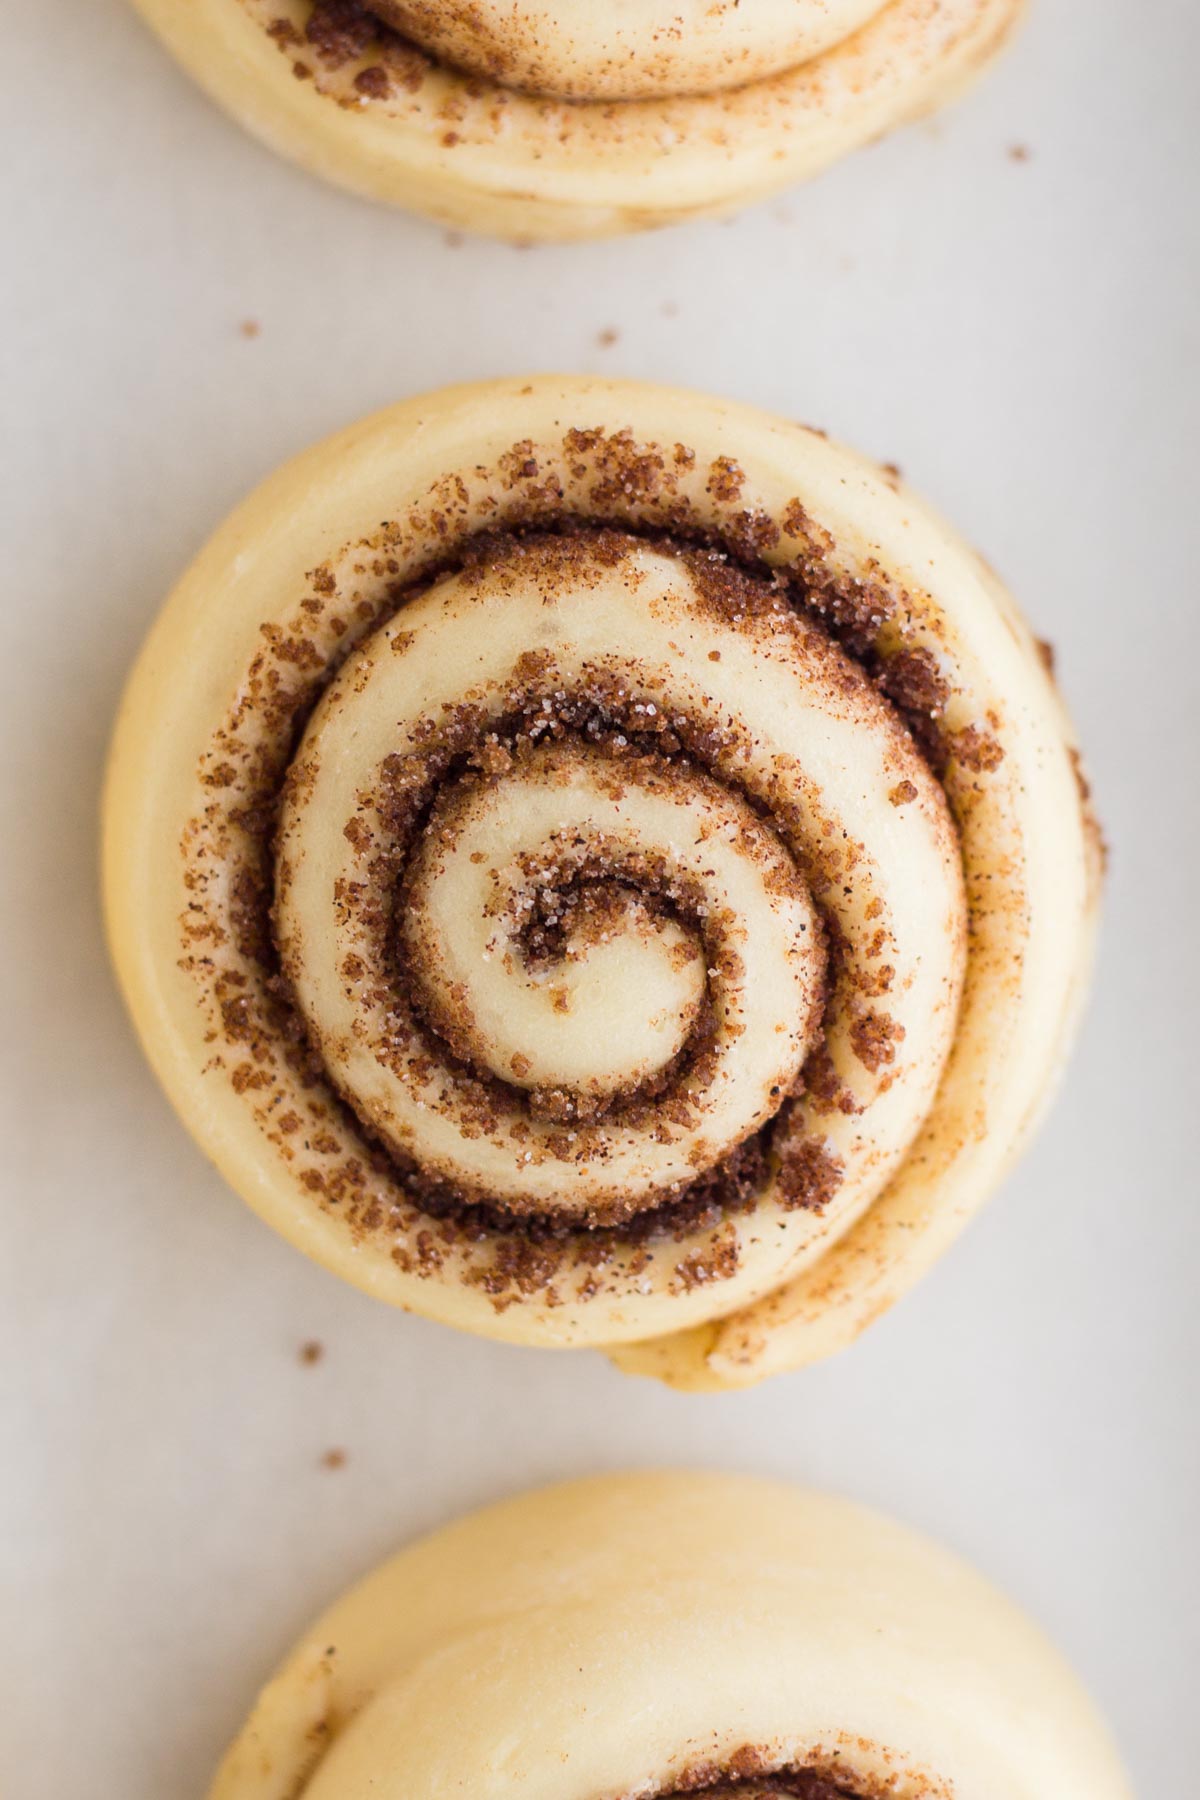 Overhead view of an unbaked cinnamon roll on a white surface.